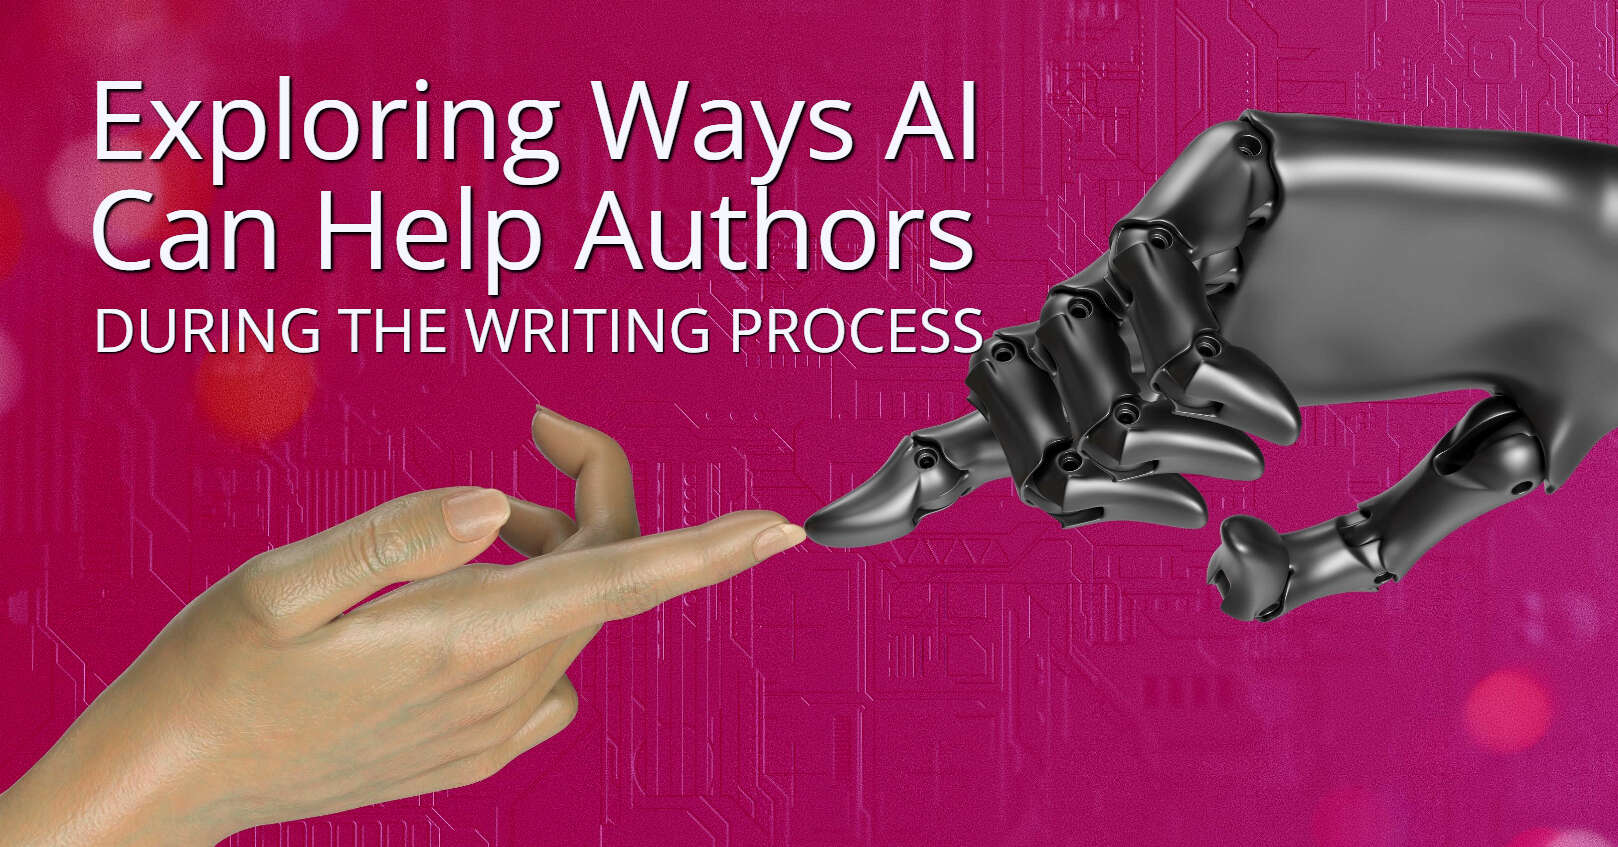 Exploring Ways AI Can Help Authors During the Writing Process